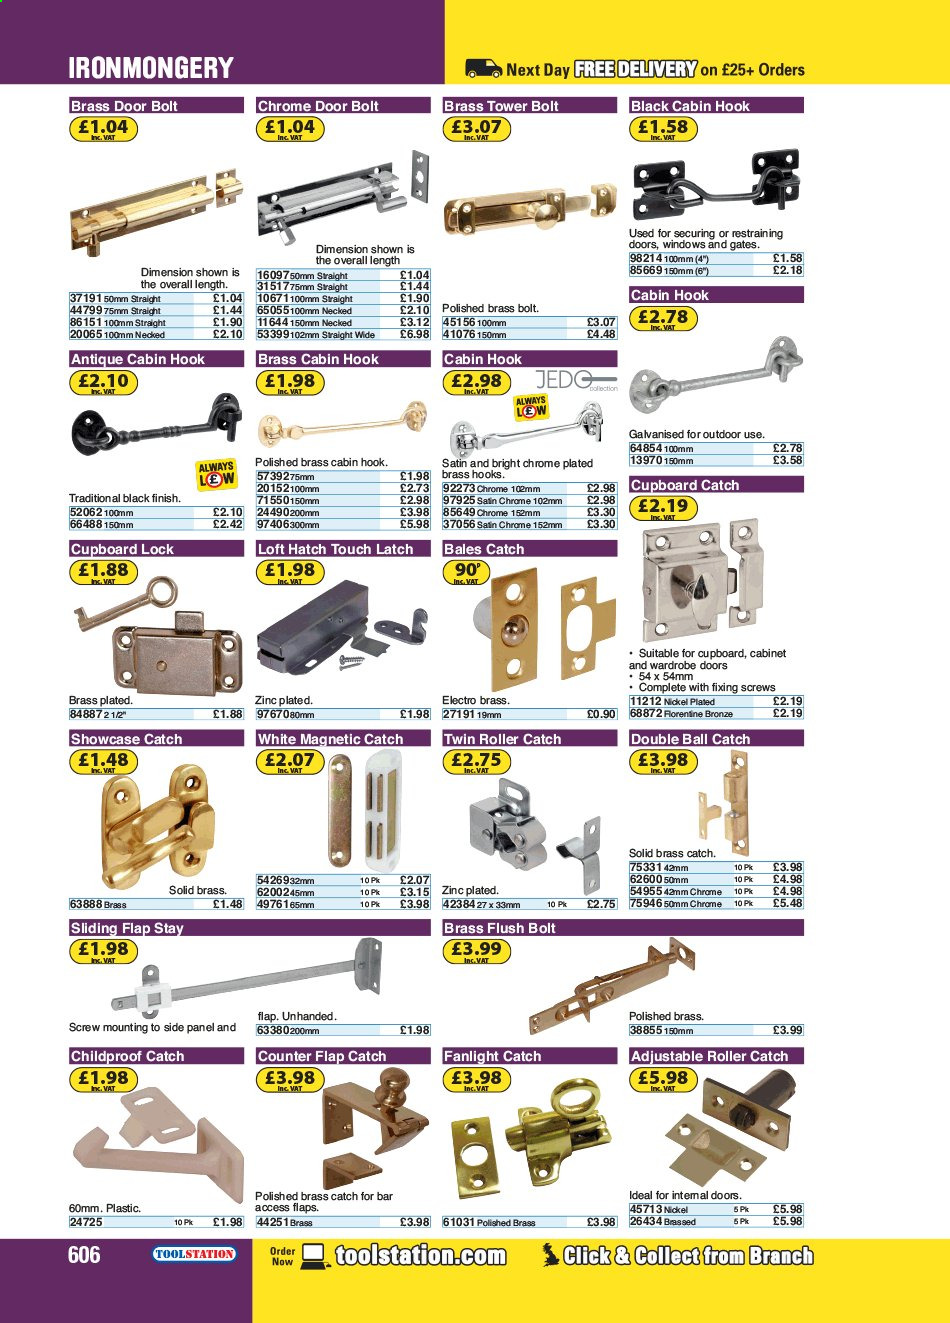 Toolstation offer . Page 606.